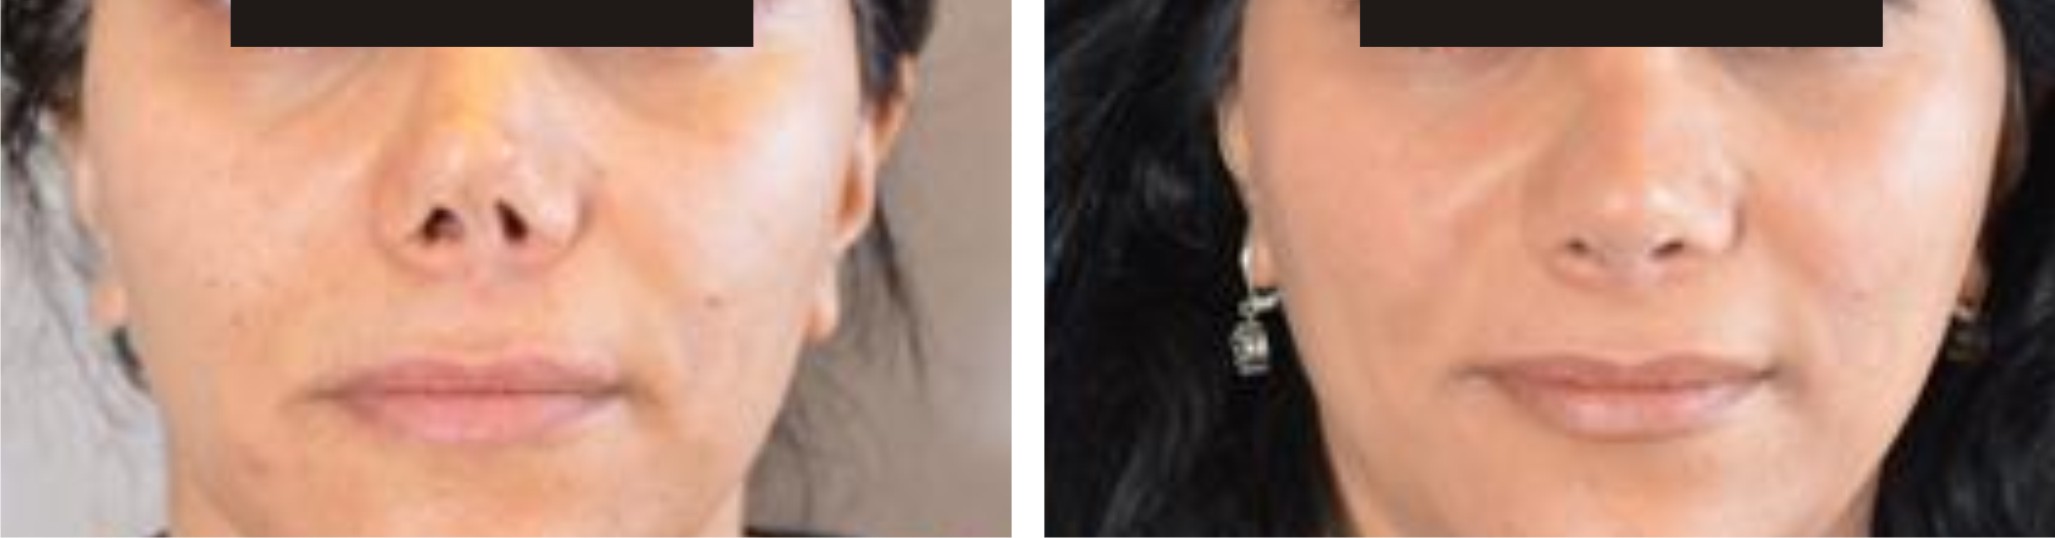 Nose Reshaping Image Two